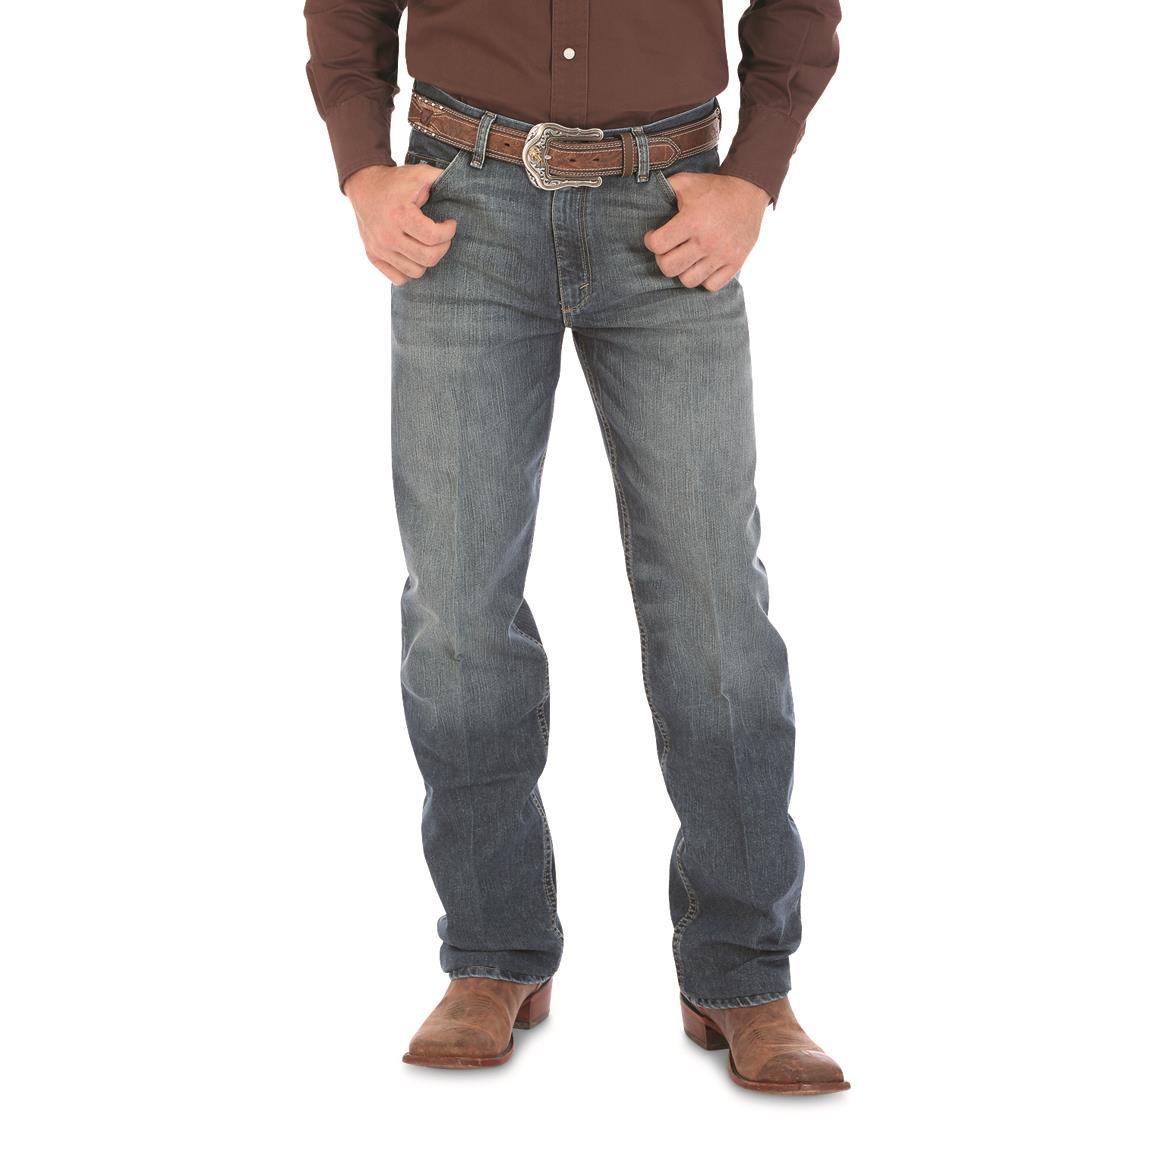 wrangler 01 competition jeans cool vantage